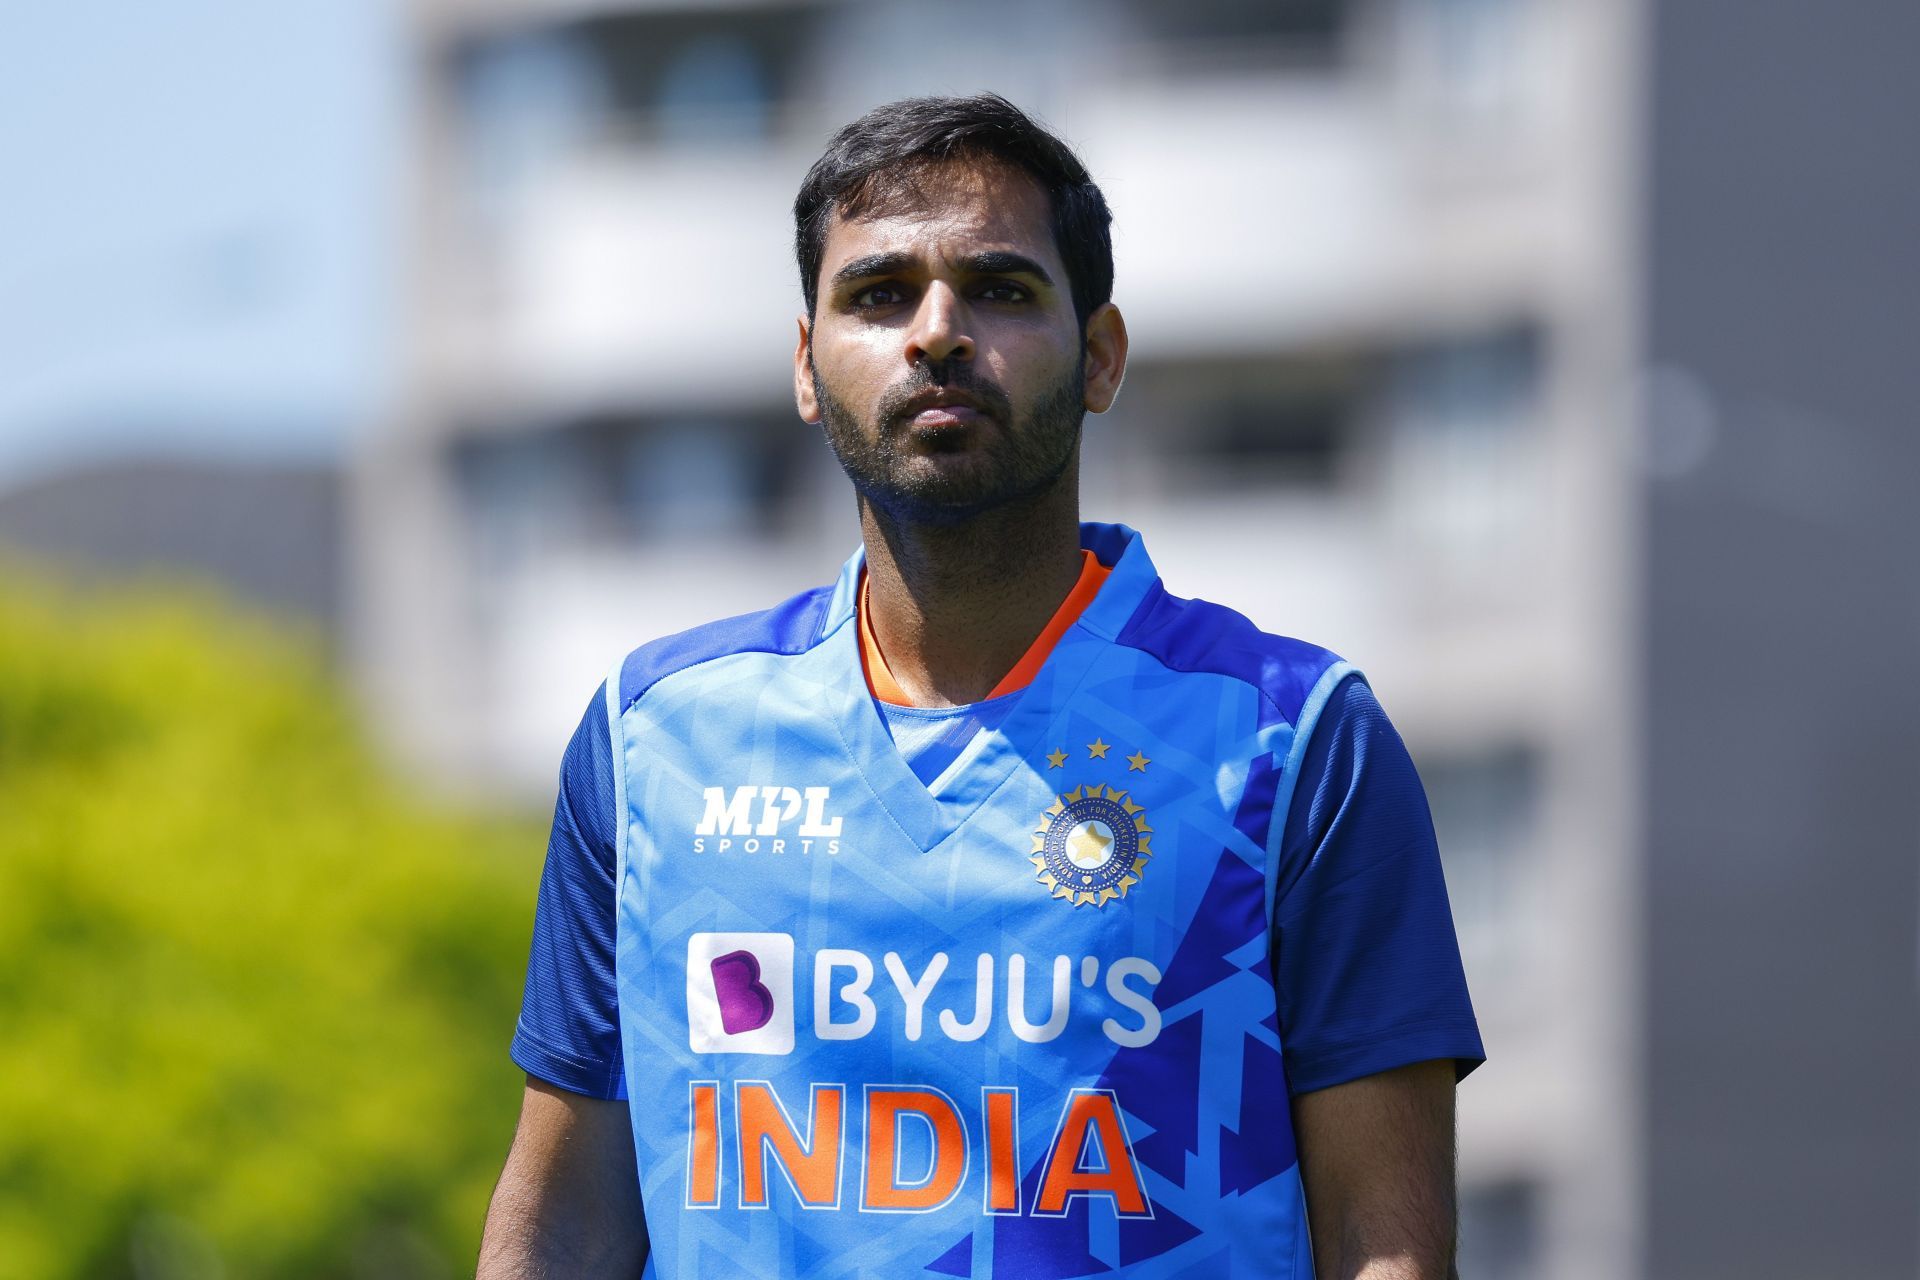 Bhuvneshwar Kumar had mixed returns in the recently concluded T20 World Cup.